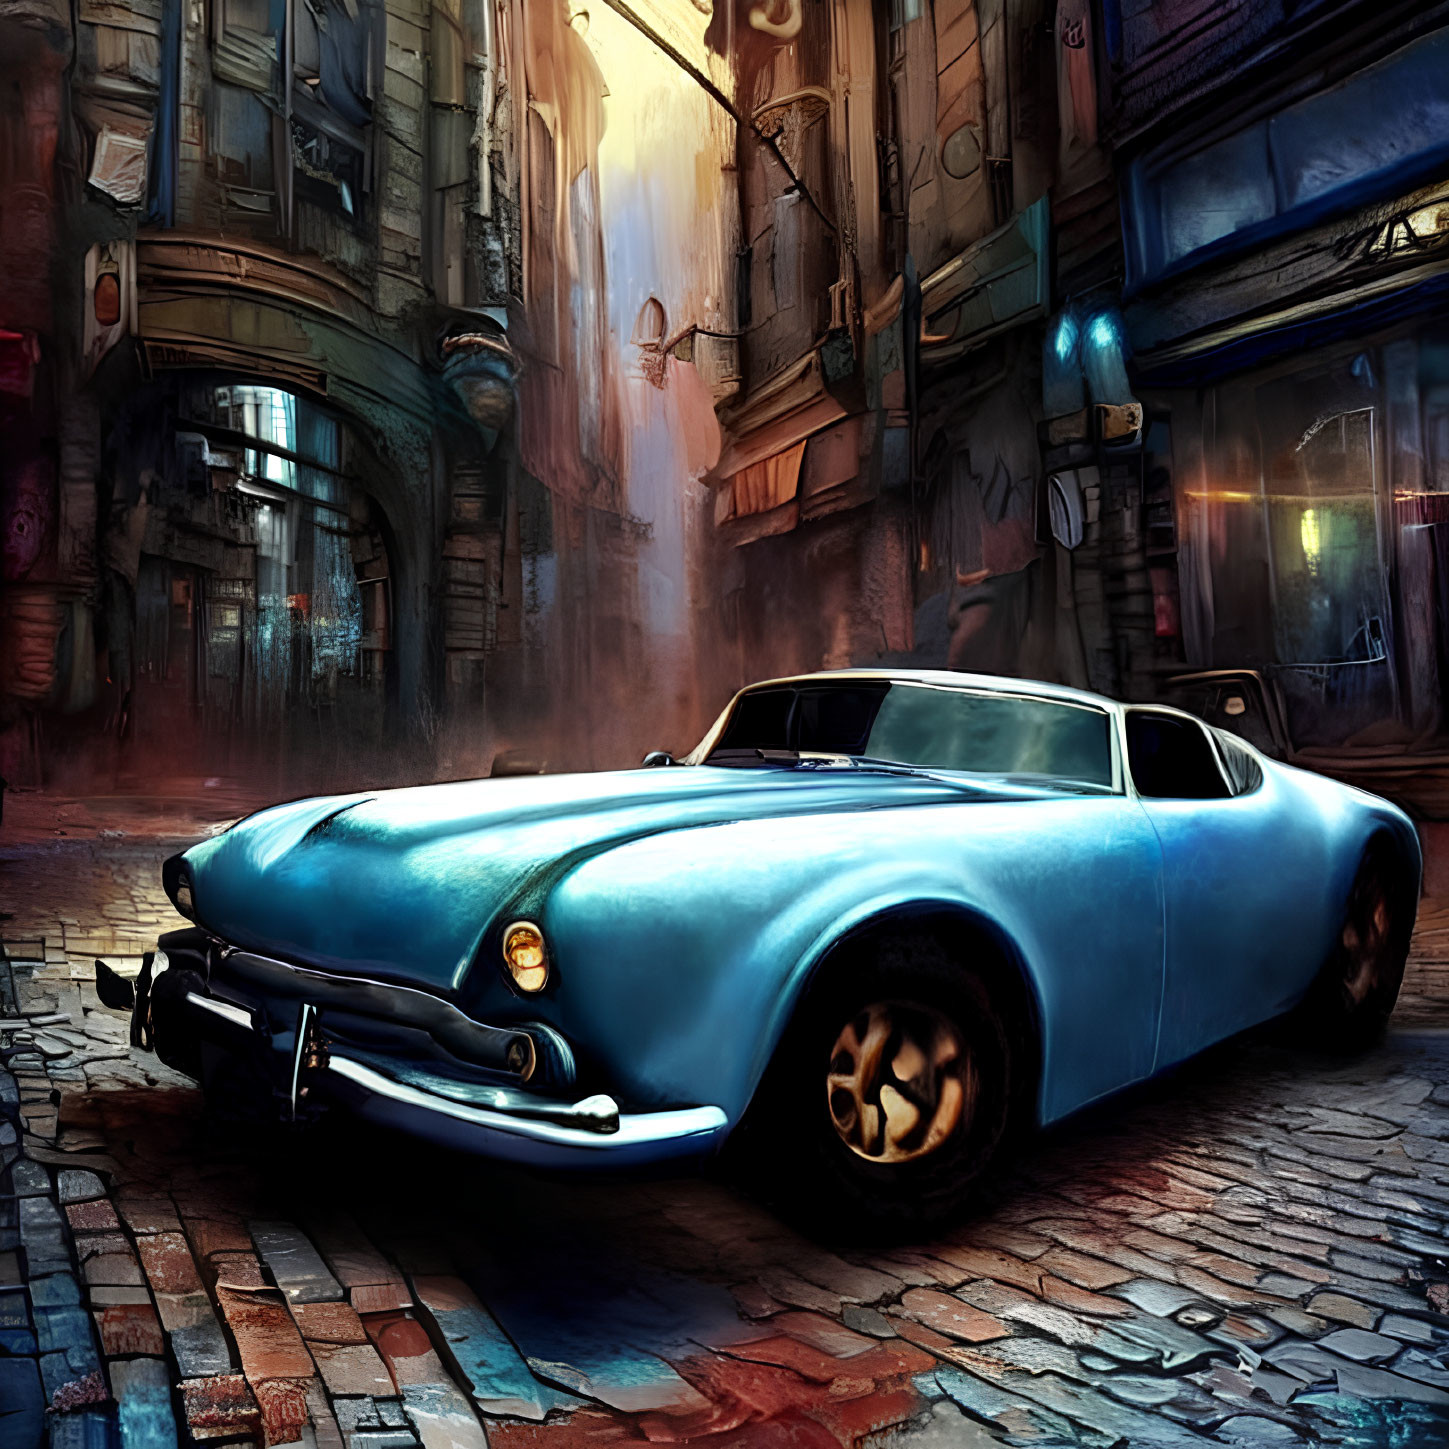 Vintage blue car in moody alley with glowing windows and retro-futuristic vibe